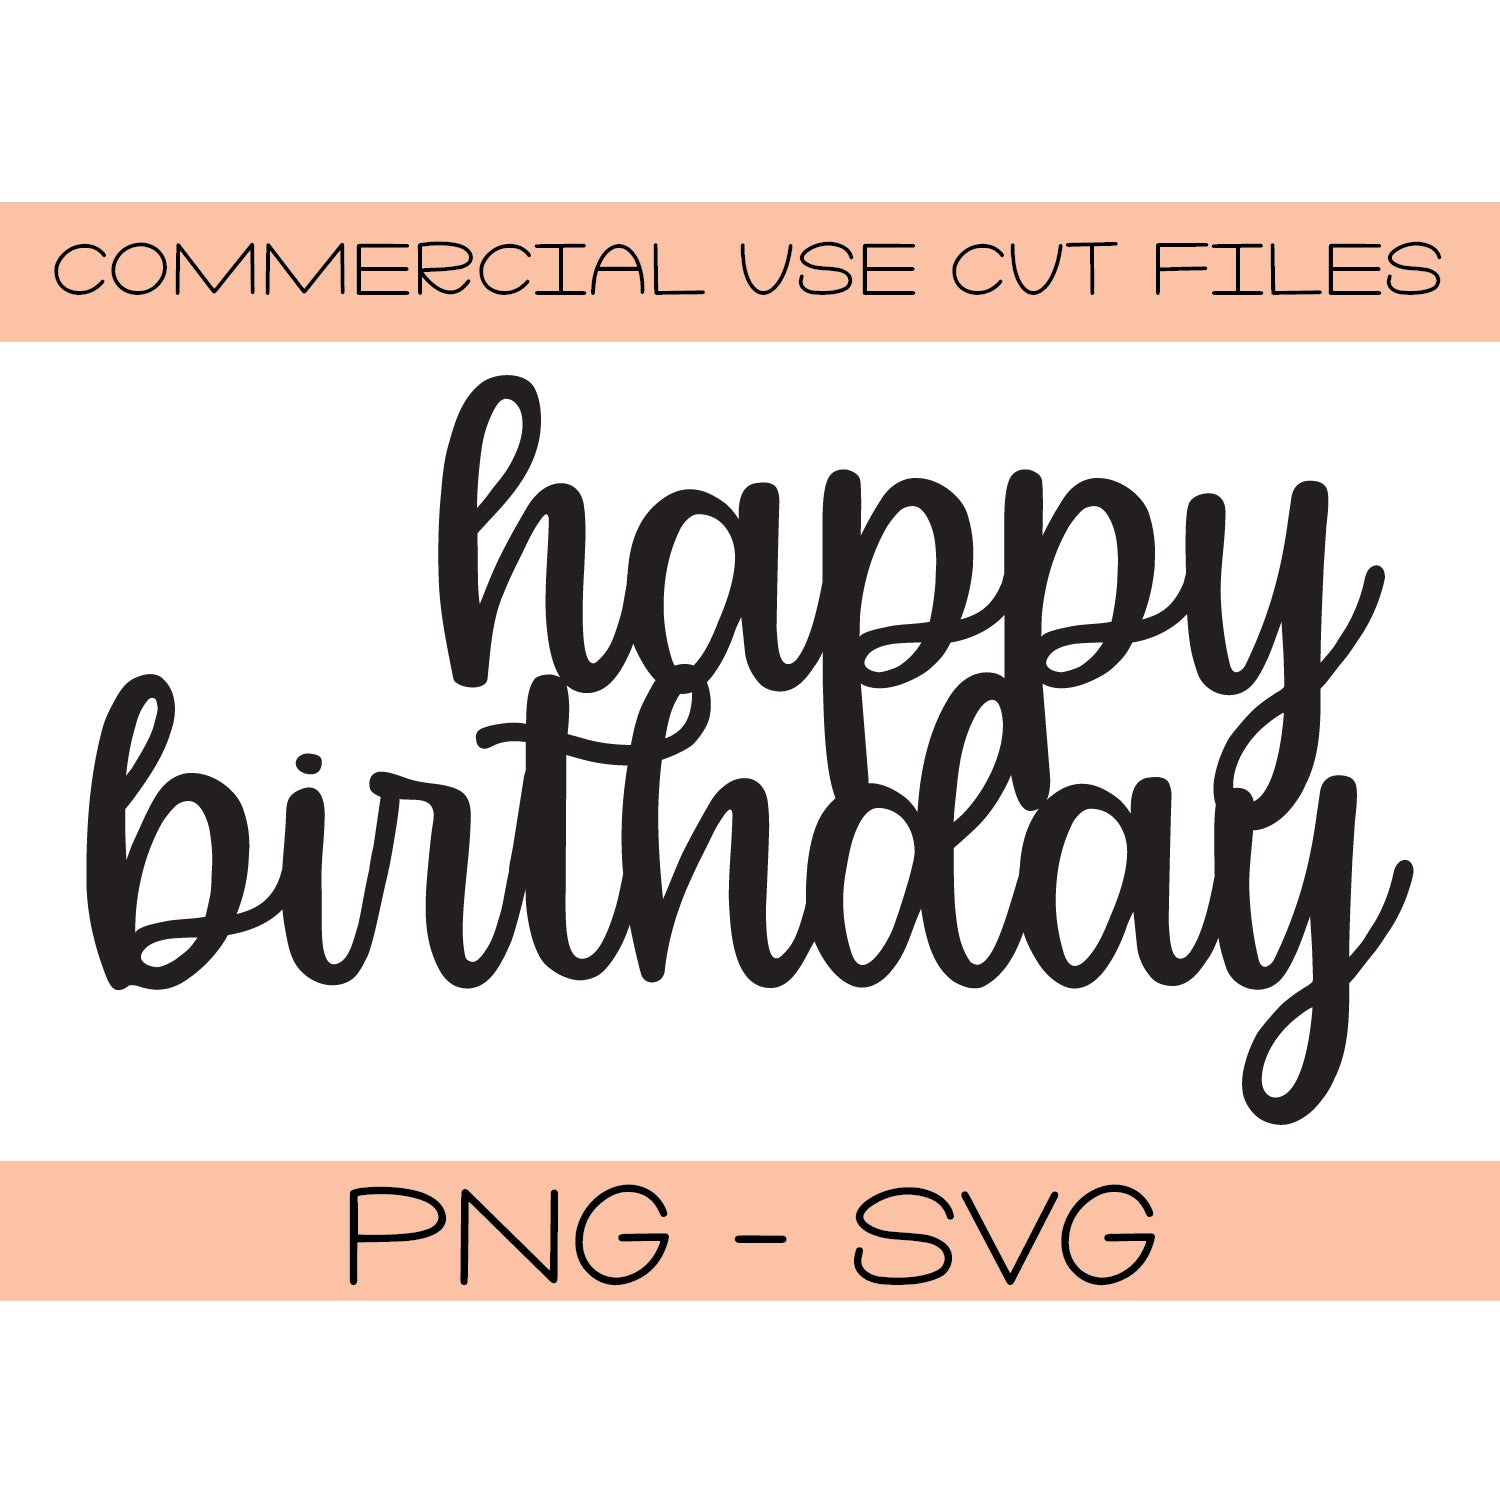 Cake Png Transparent Transparent Background - Happy Birthday Cake Png  Clipart is best quality and hig… | Latest birthday cake, Happy birthday  cakes, Cake background